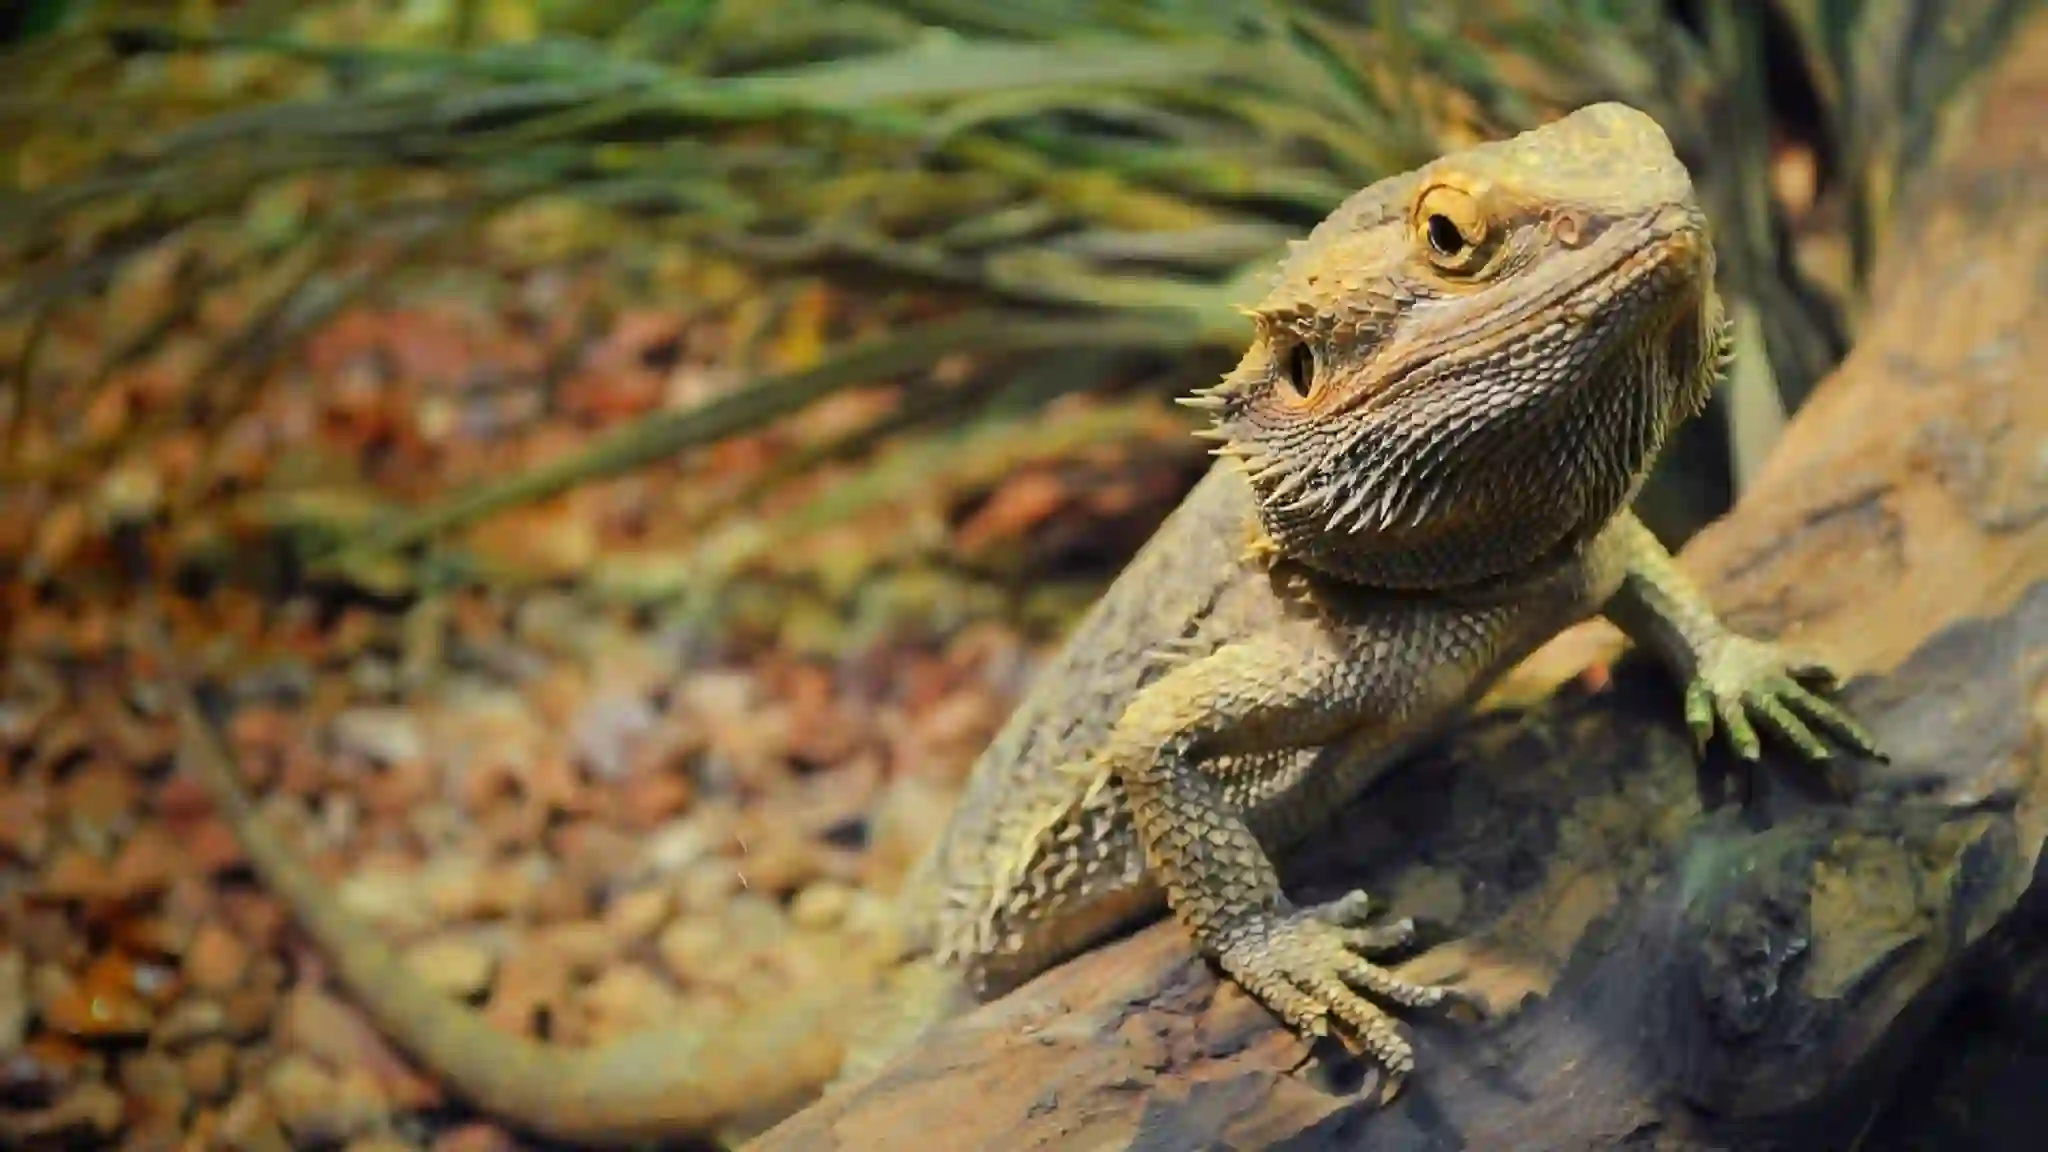 Can Bearded Dragons Eat Calcium Powder?